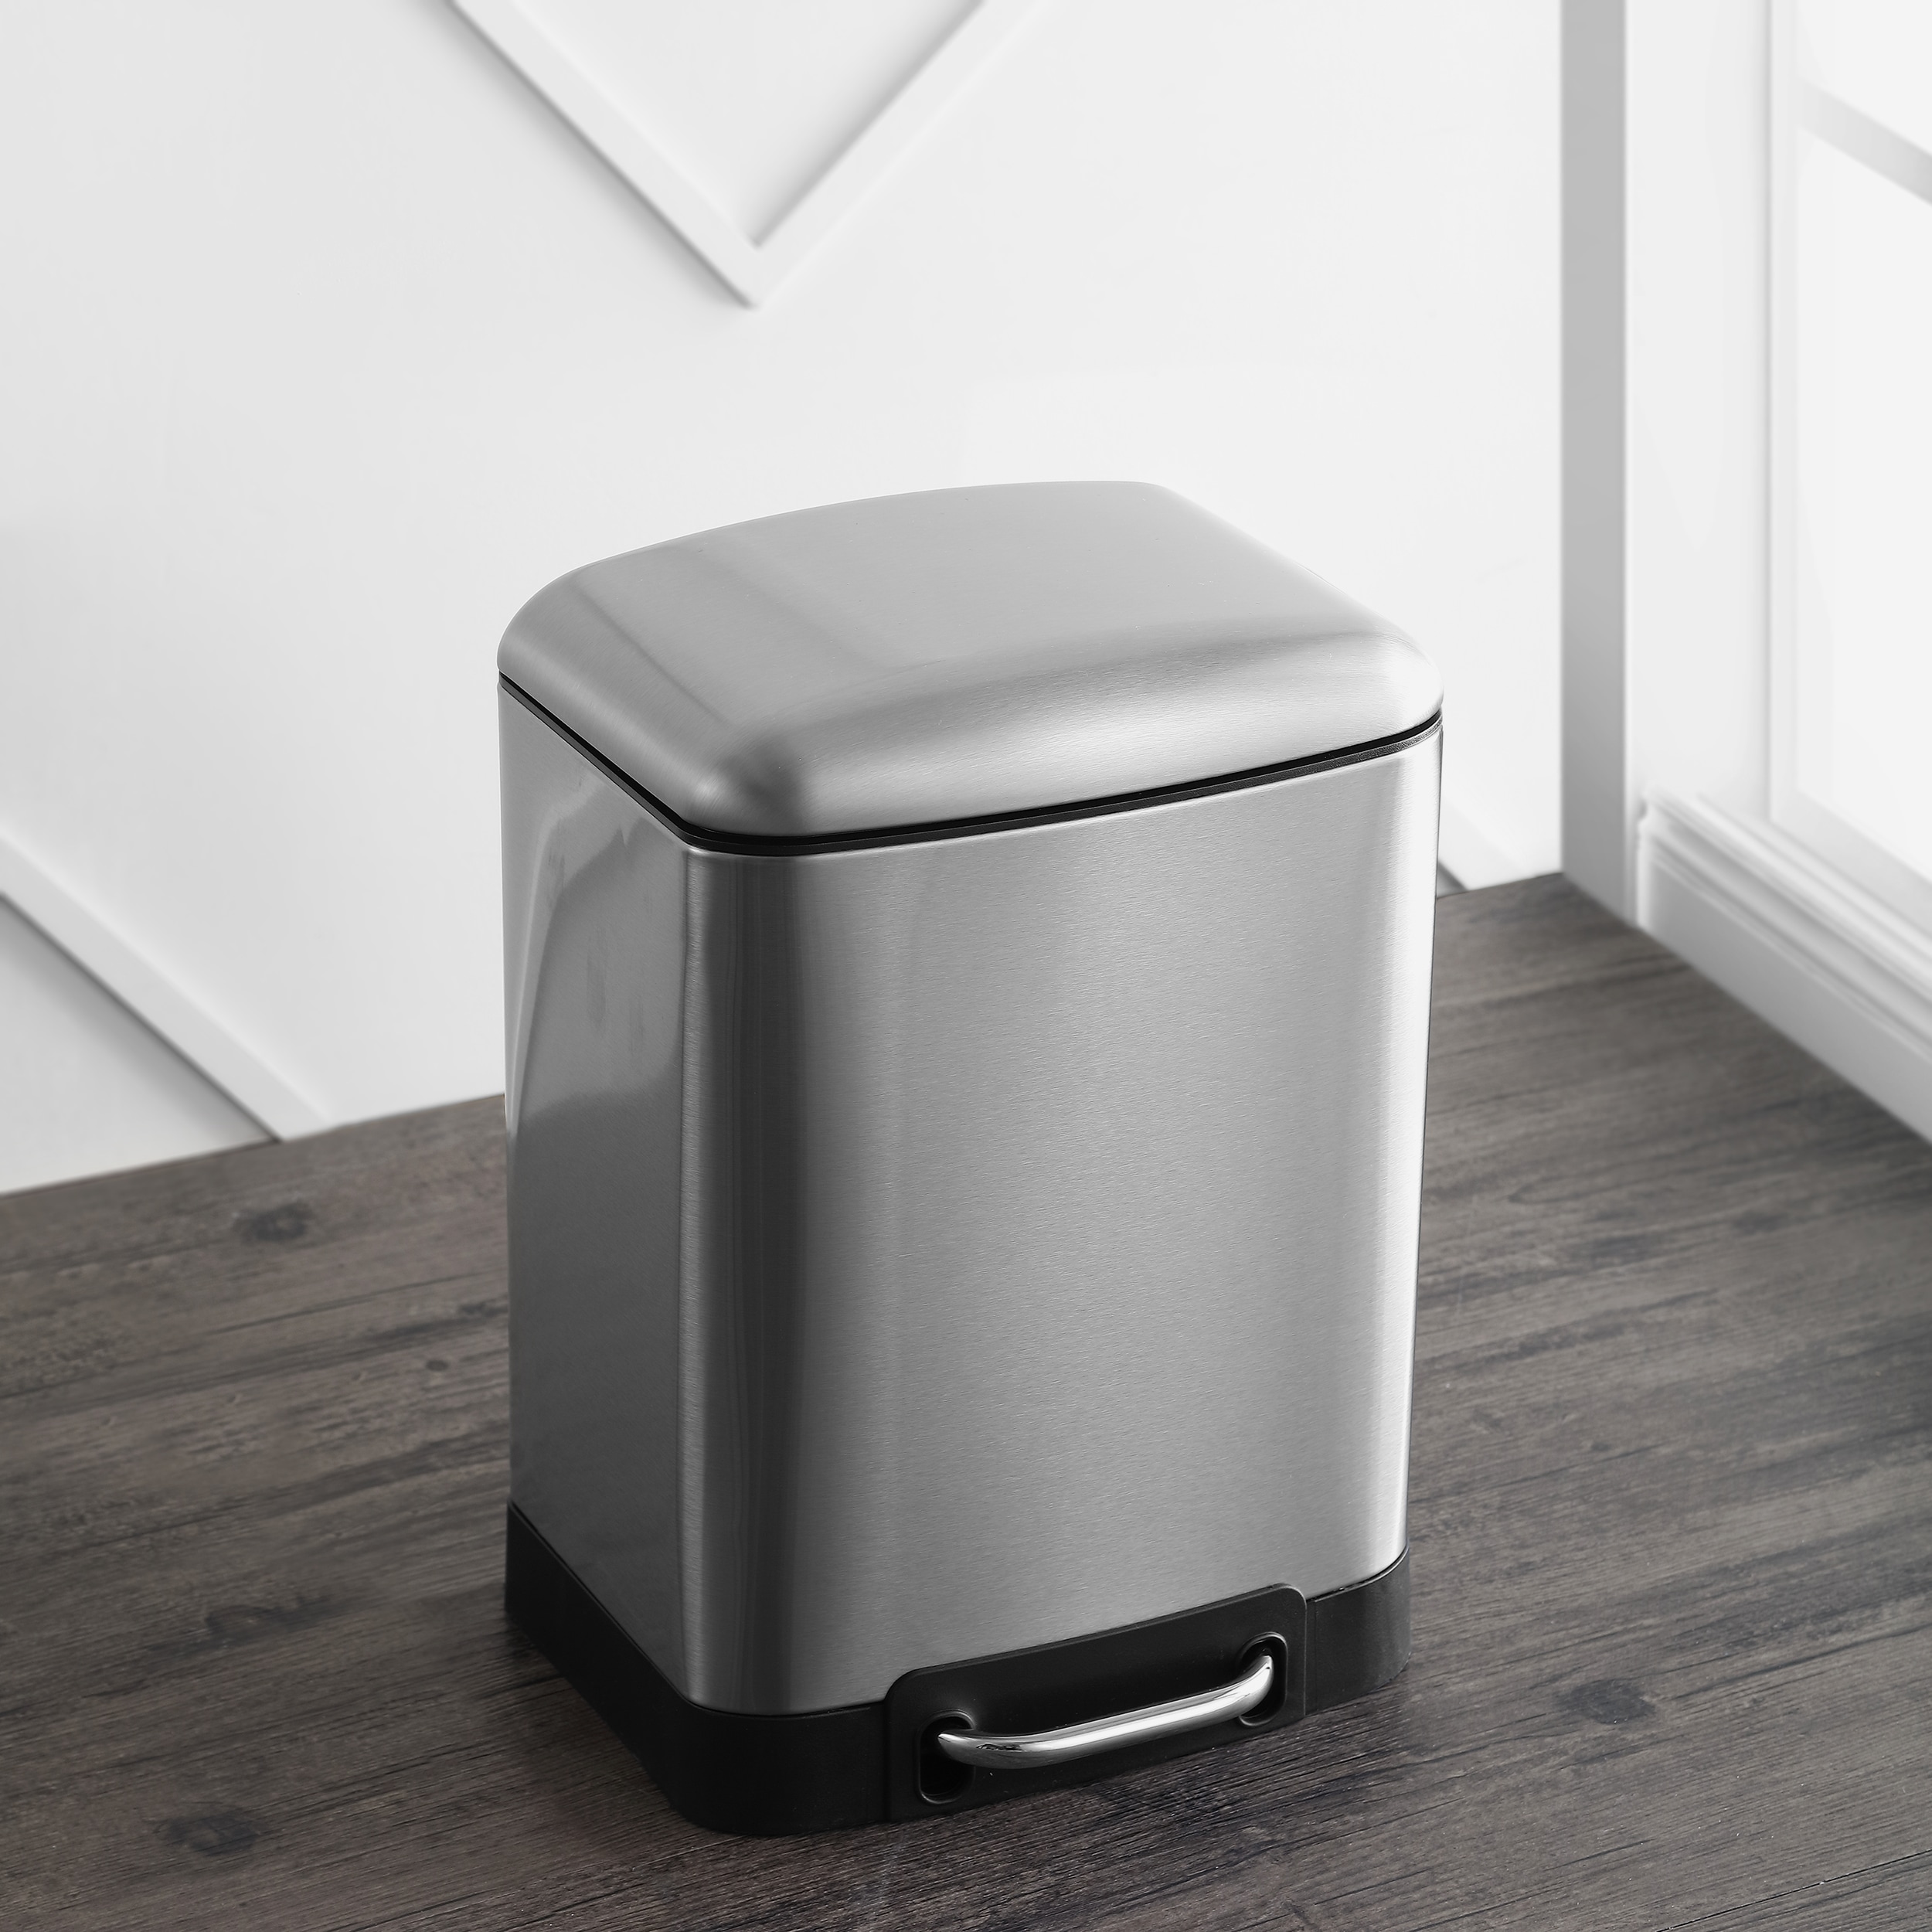 Rectangular, Stainless Steel, Soft-Close, Step Trash Can, 30 Liter / 7.9  Gallon, Satin Nickel Finished